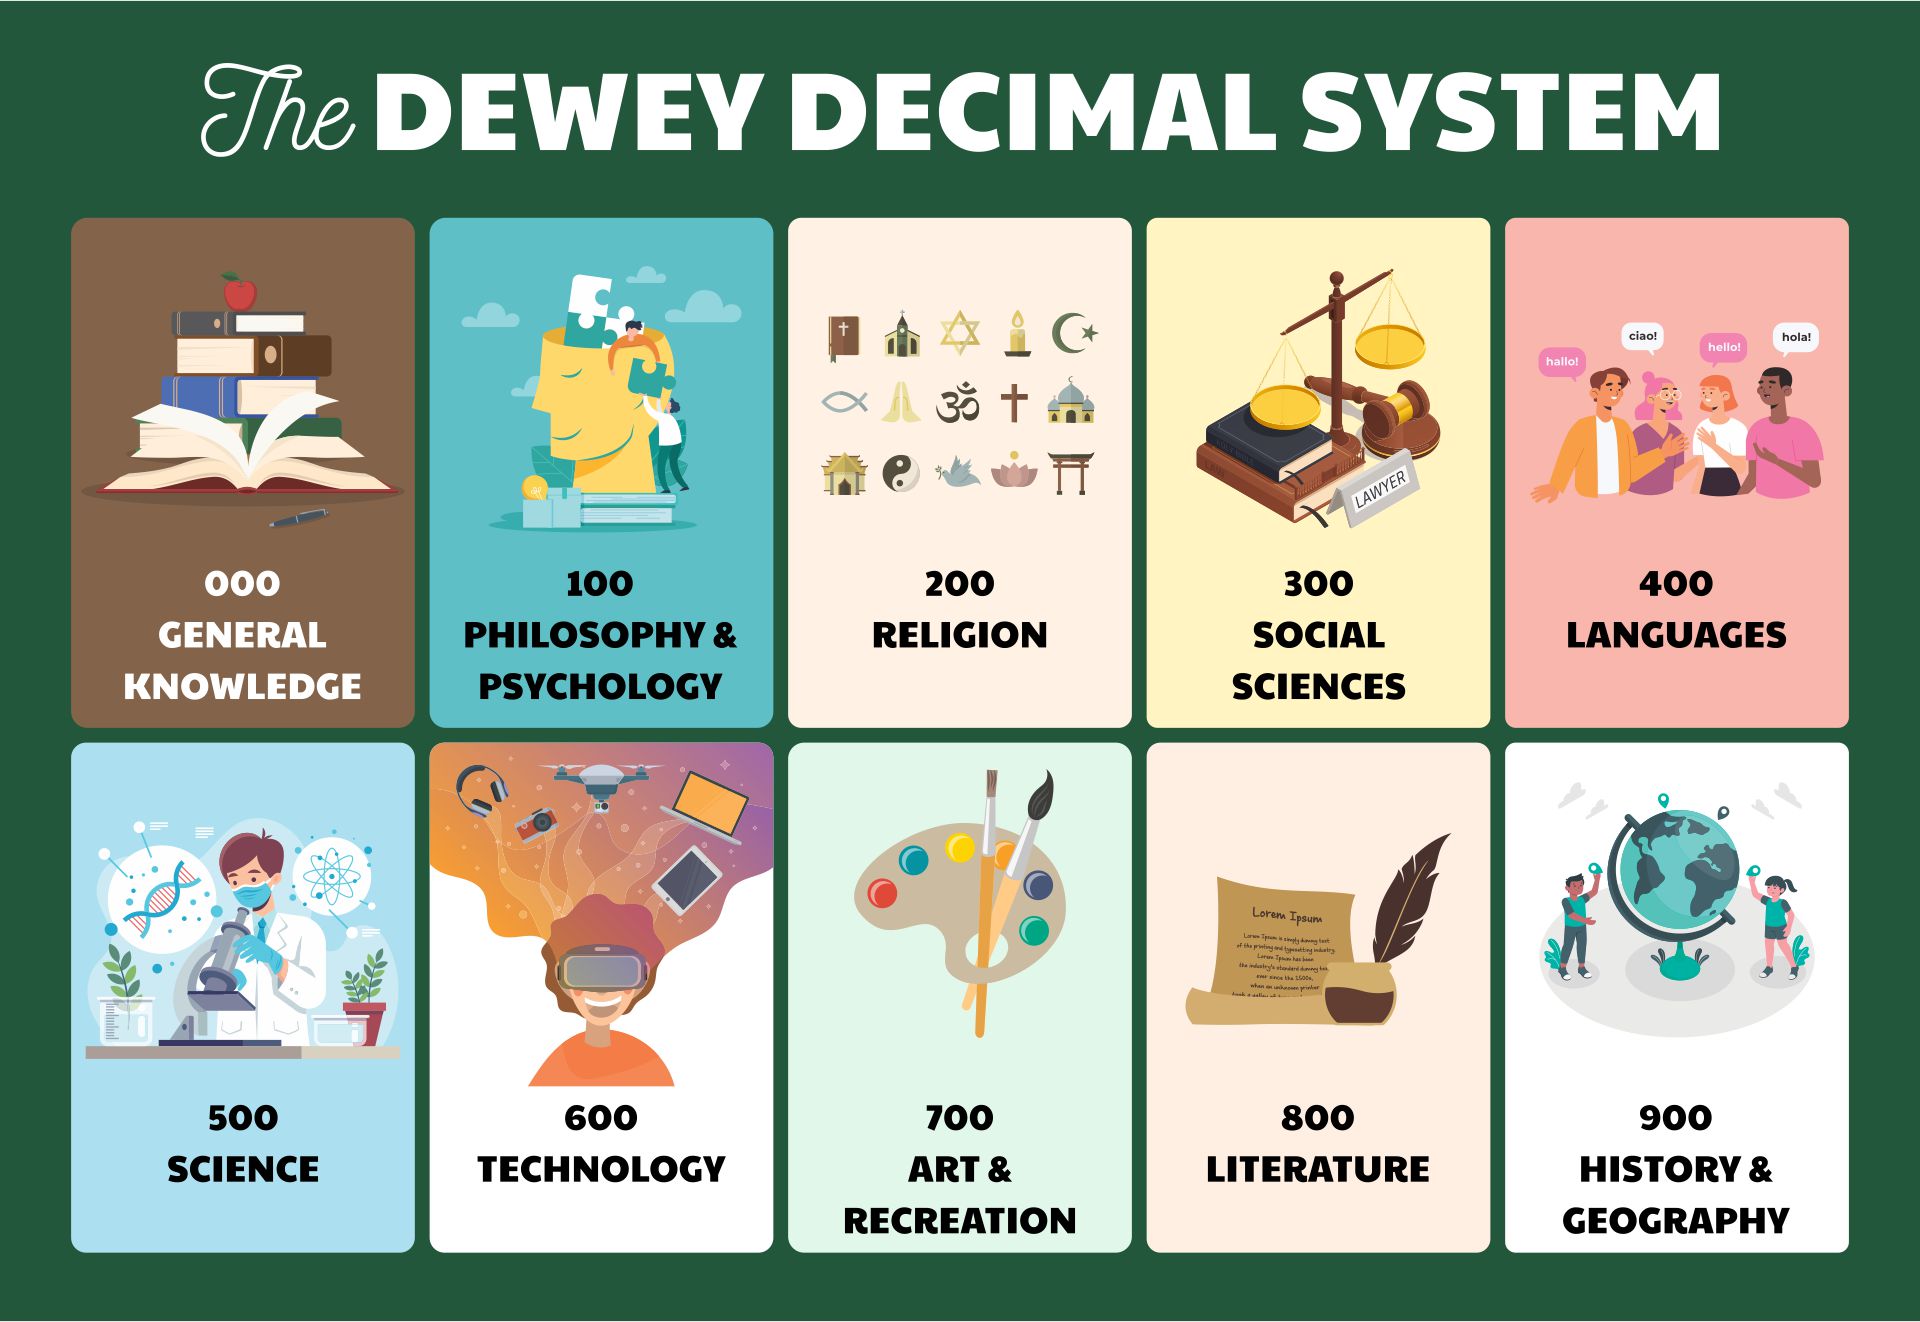 8-best-images-of-printable-dewey-decimal-system-posters-for-free